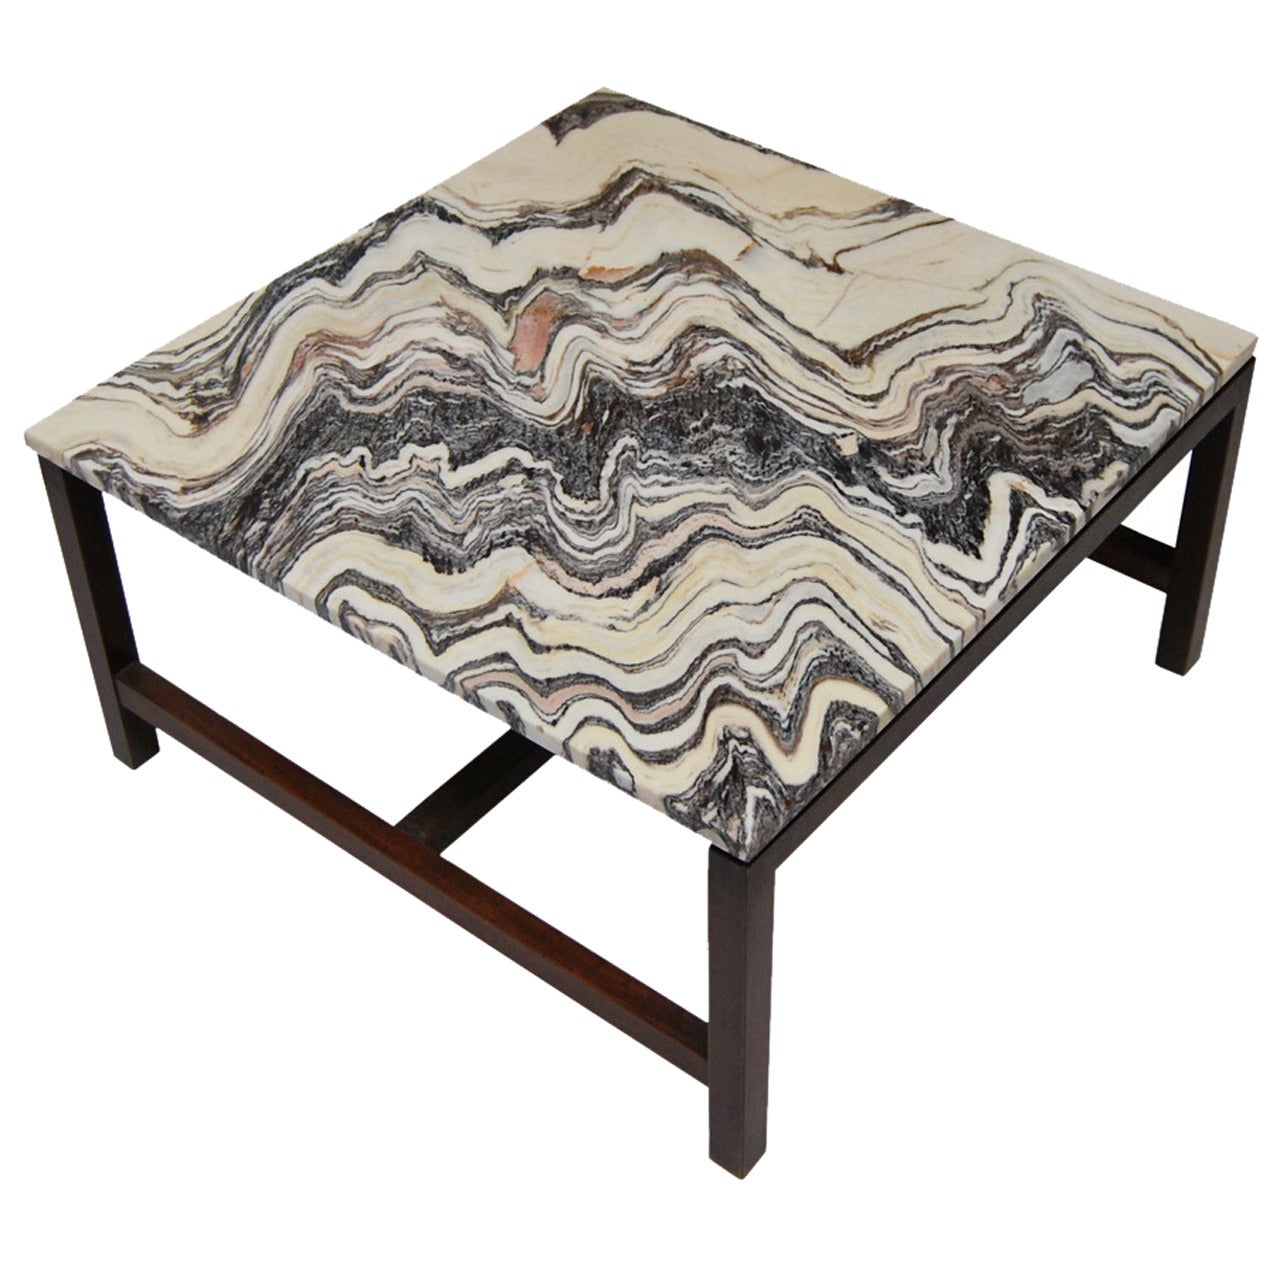 Rosewood Coffee Table with Marble Tabletop